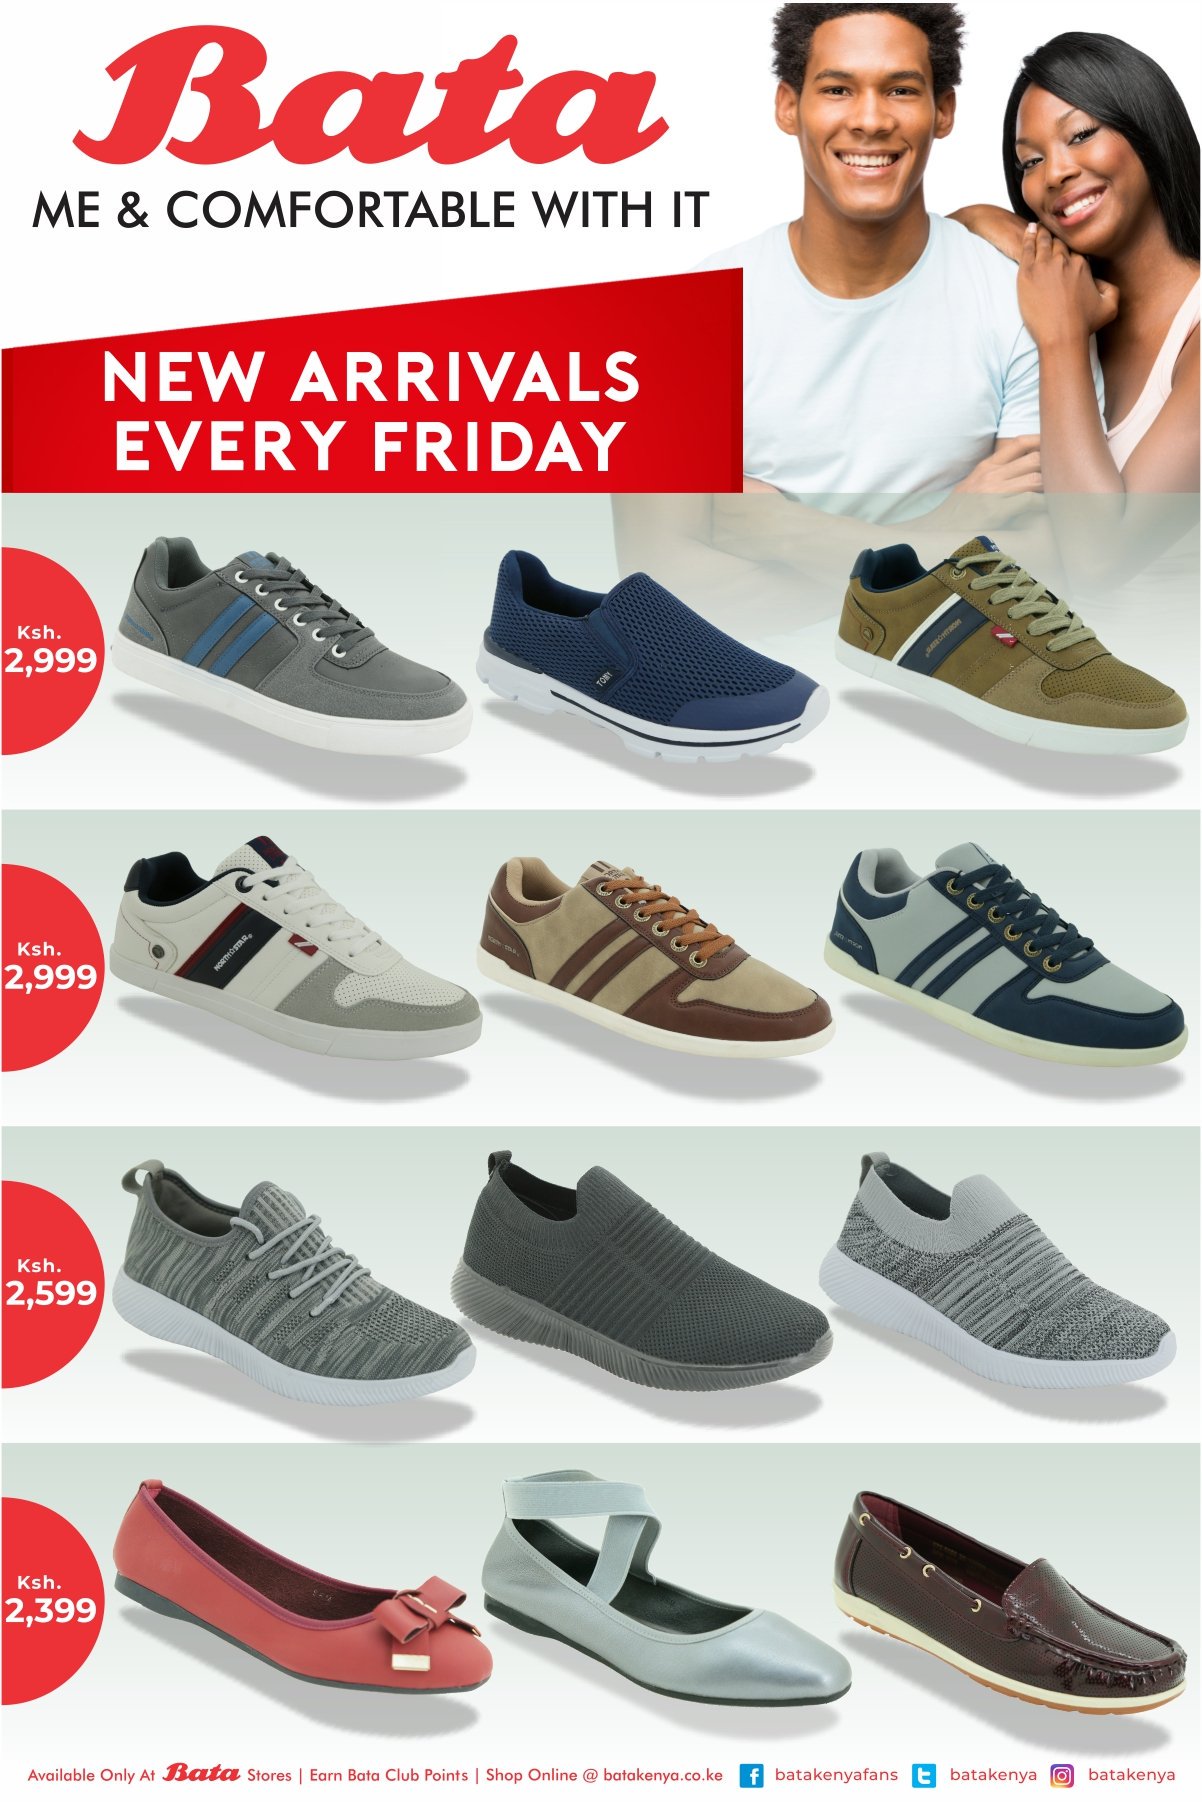 Bata Shoe Kenya P.L.C on Twitter: "Bata has the complete selection for you  with the #NewArrivalsEveryFriday . Available at a Bata store near you.  Register, shop and earn Bata Club Points. Shop